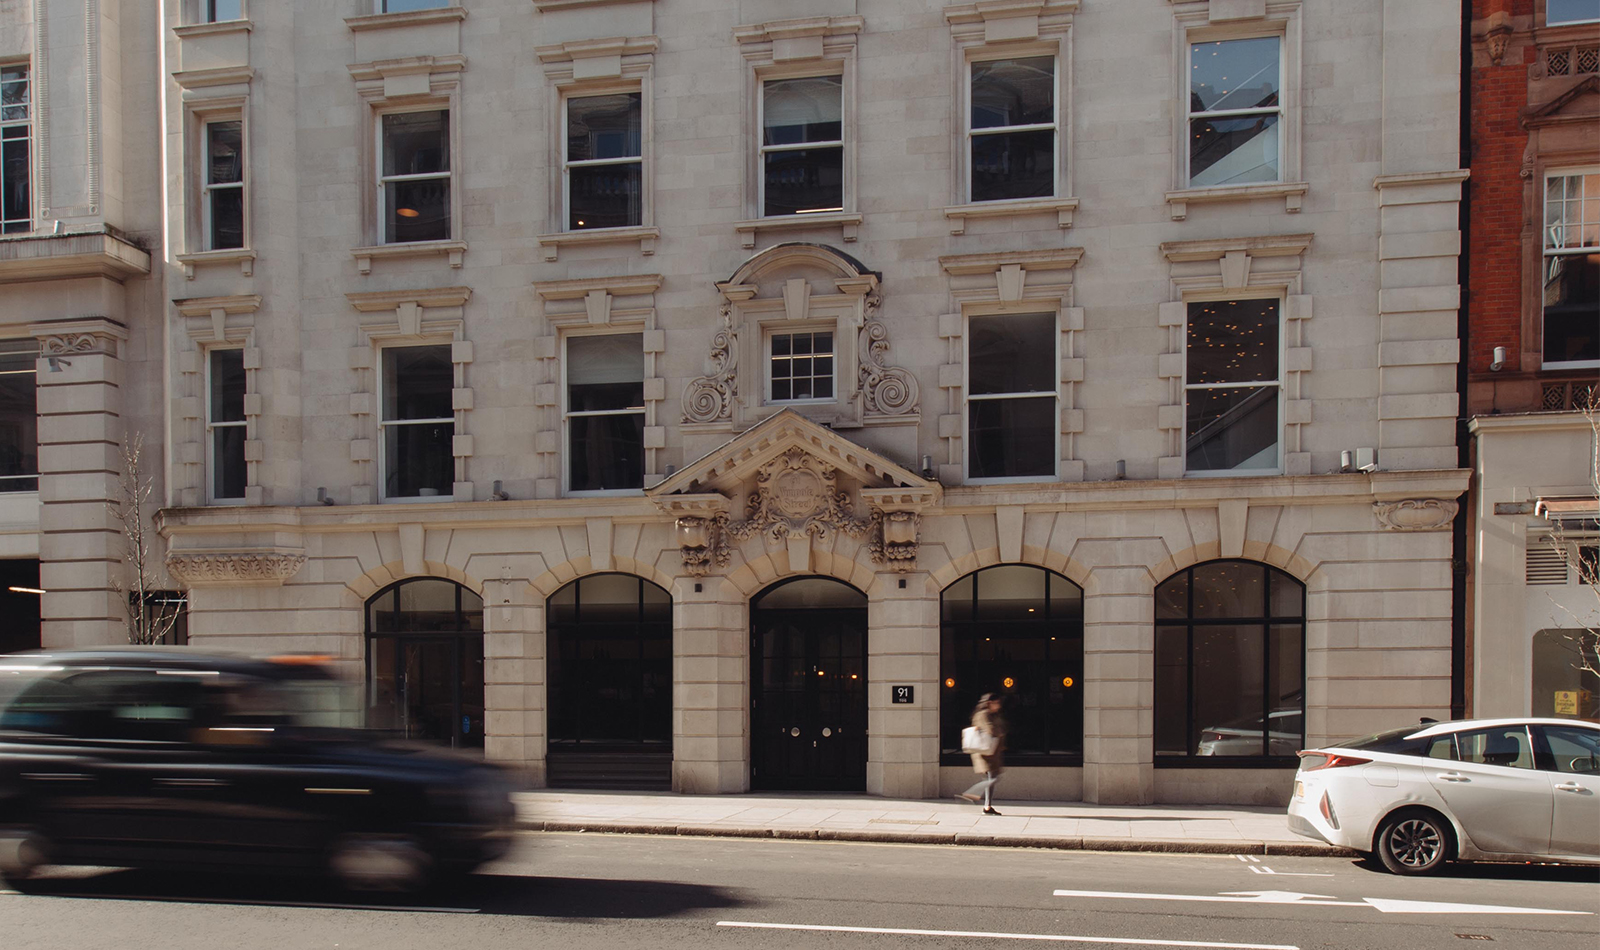 Main image of building Wimpole Street